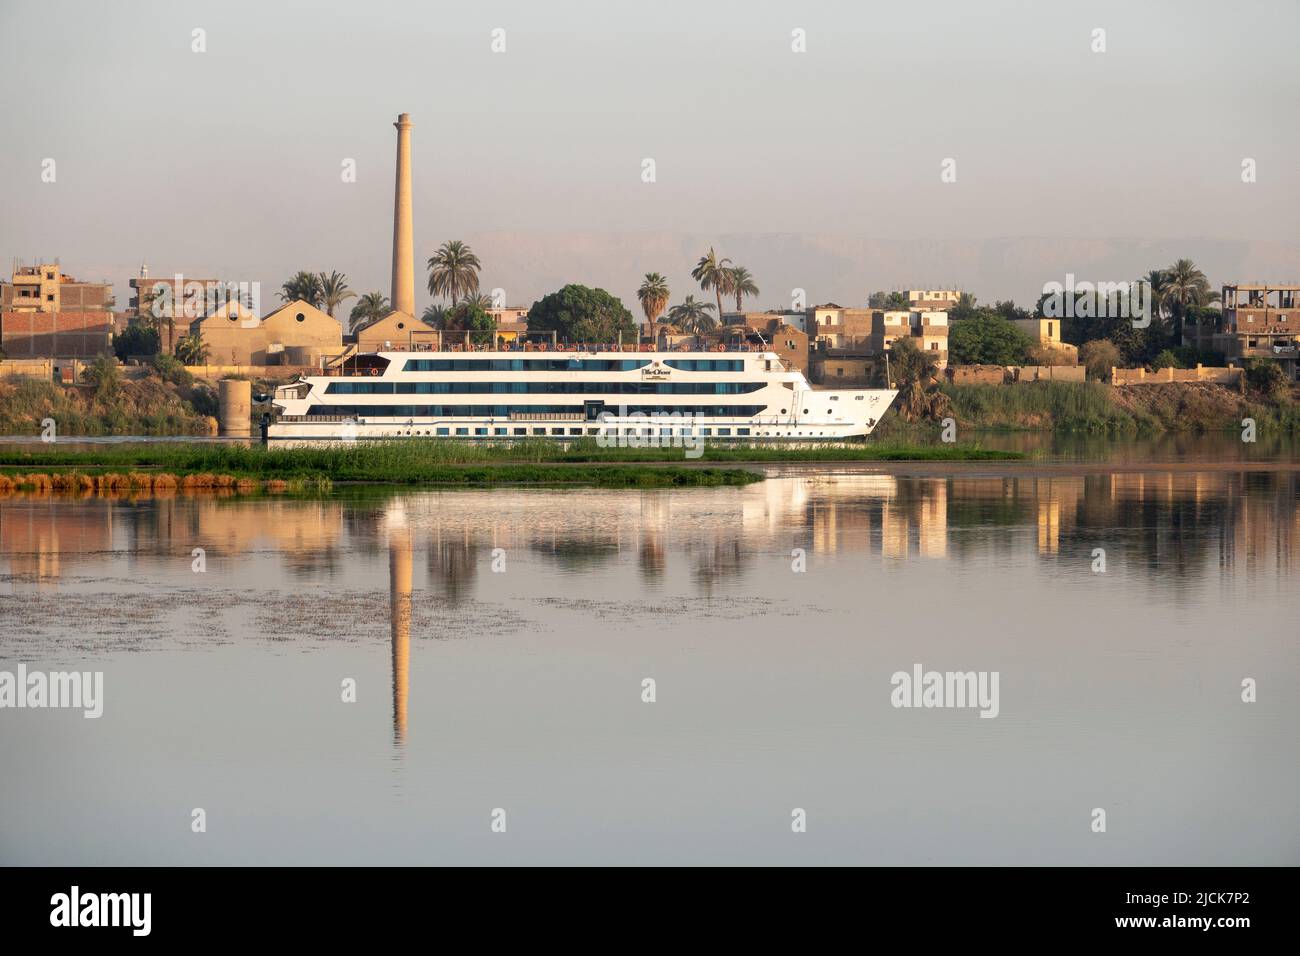 Nile cruise boat sailing side on to camera on the calm water with reflections of industrial scene behind in early morning light Stock Photo